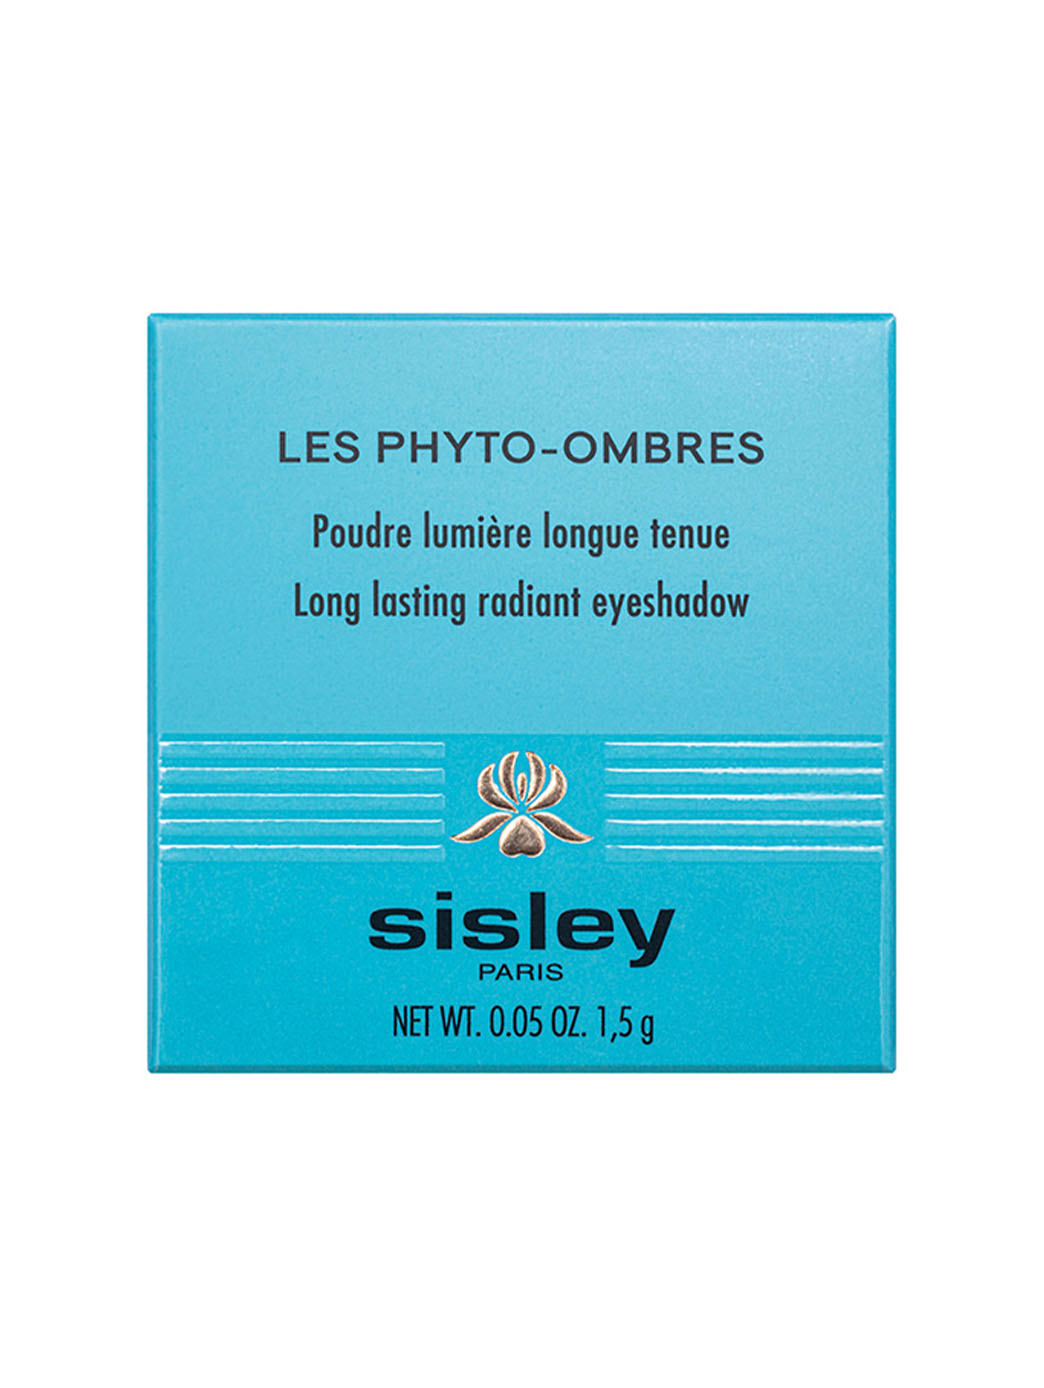 42472957608086 - Les Phyto-Ombres